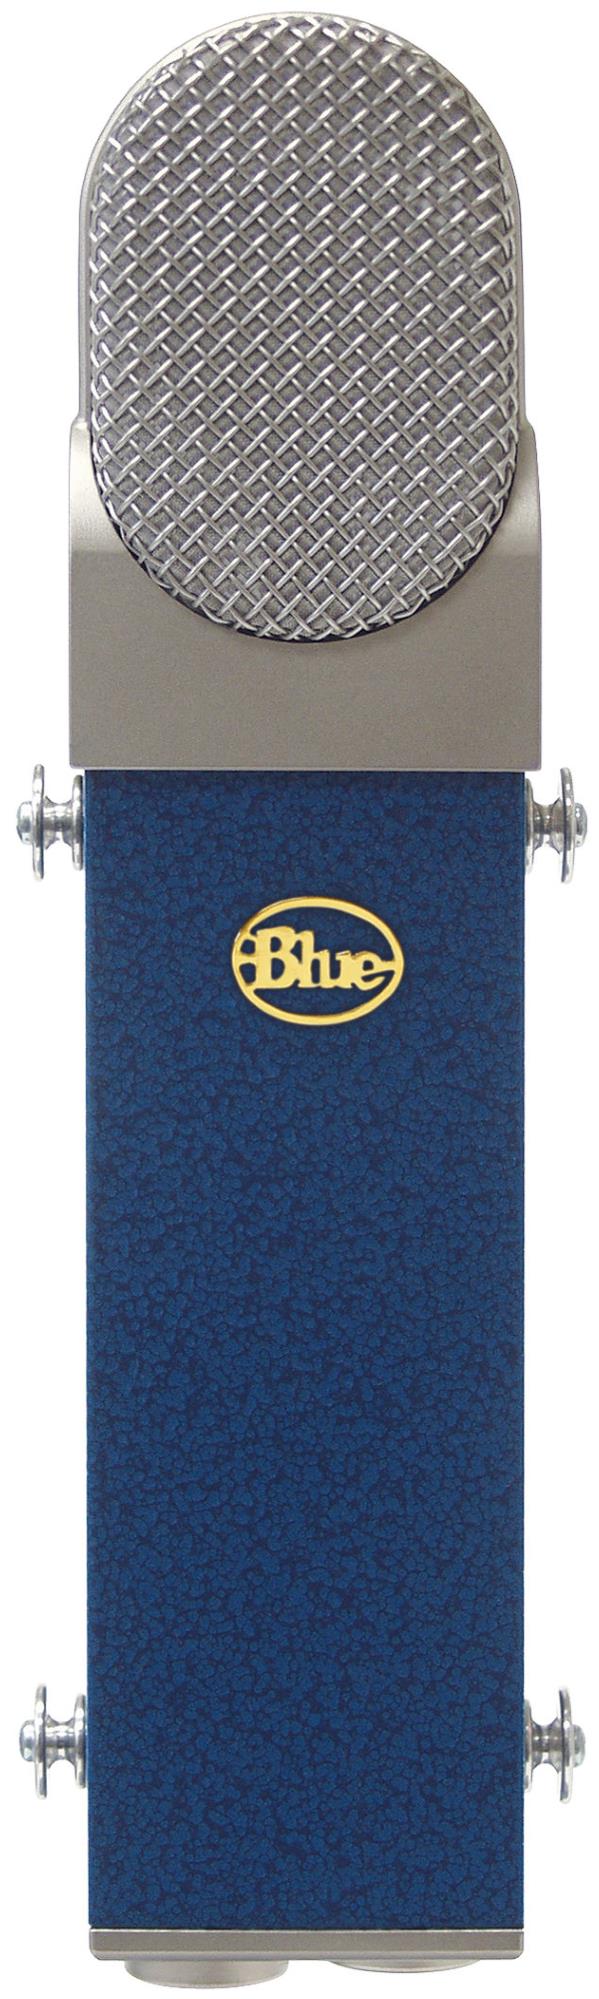 Blue Microphones Blueberry Large-diaphragm Cardioid Condenser Microphone